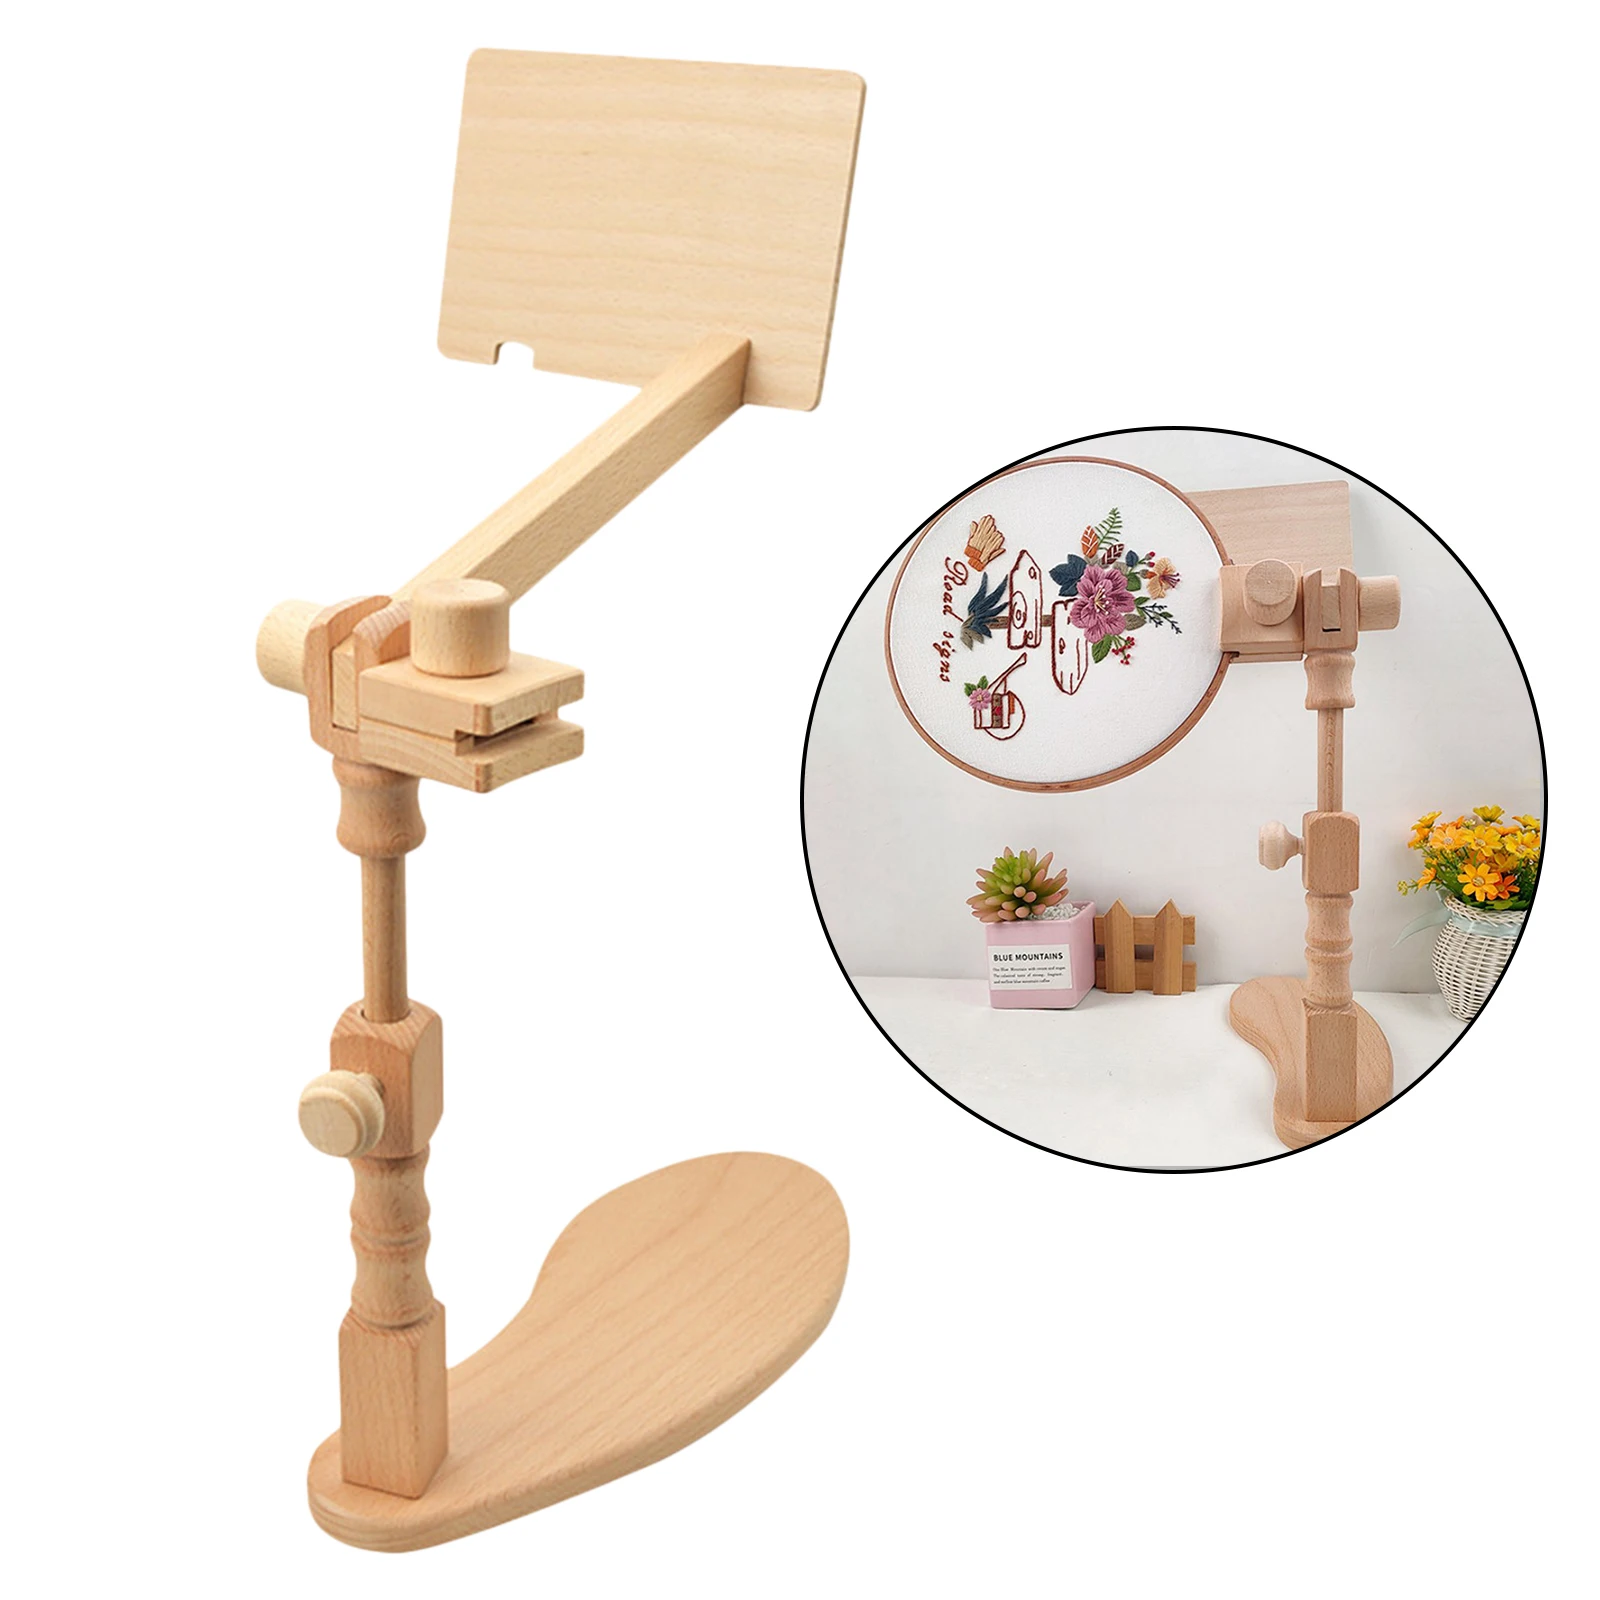 Wooden Embroidery Hoop Adjustable Desktop Stand Cross Stitch Rack Frames Rings Holder for Adults Mother Gifts